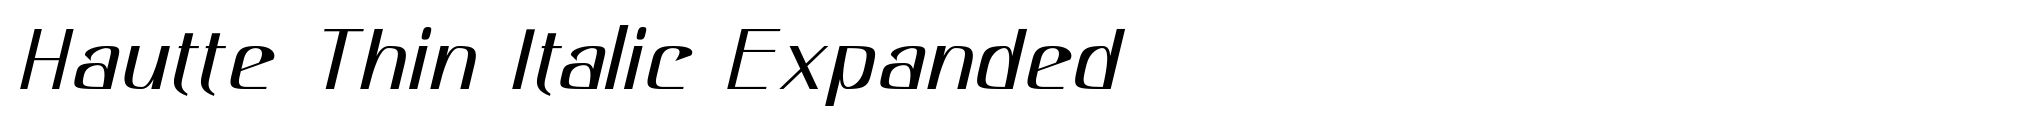 Hautte Thin Italic Expanded image